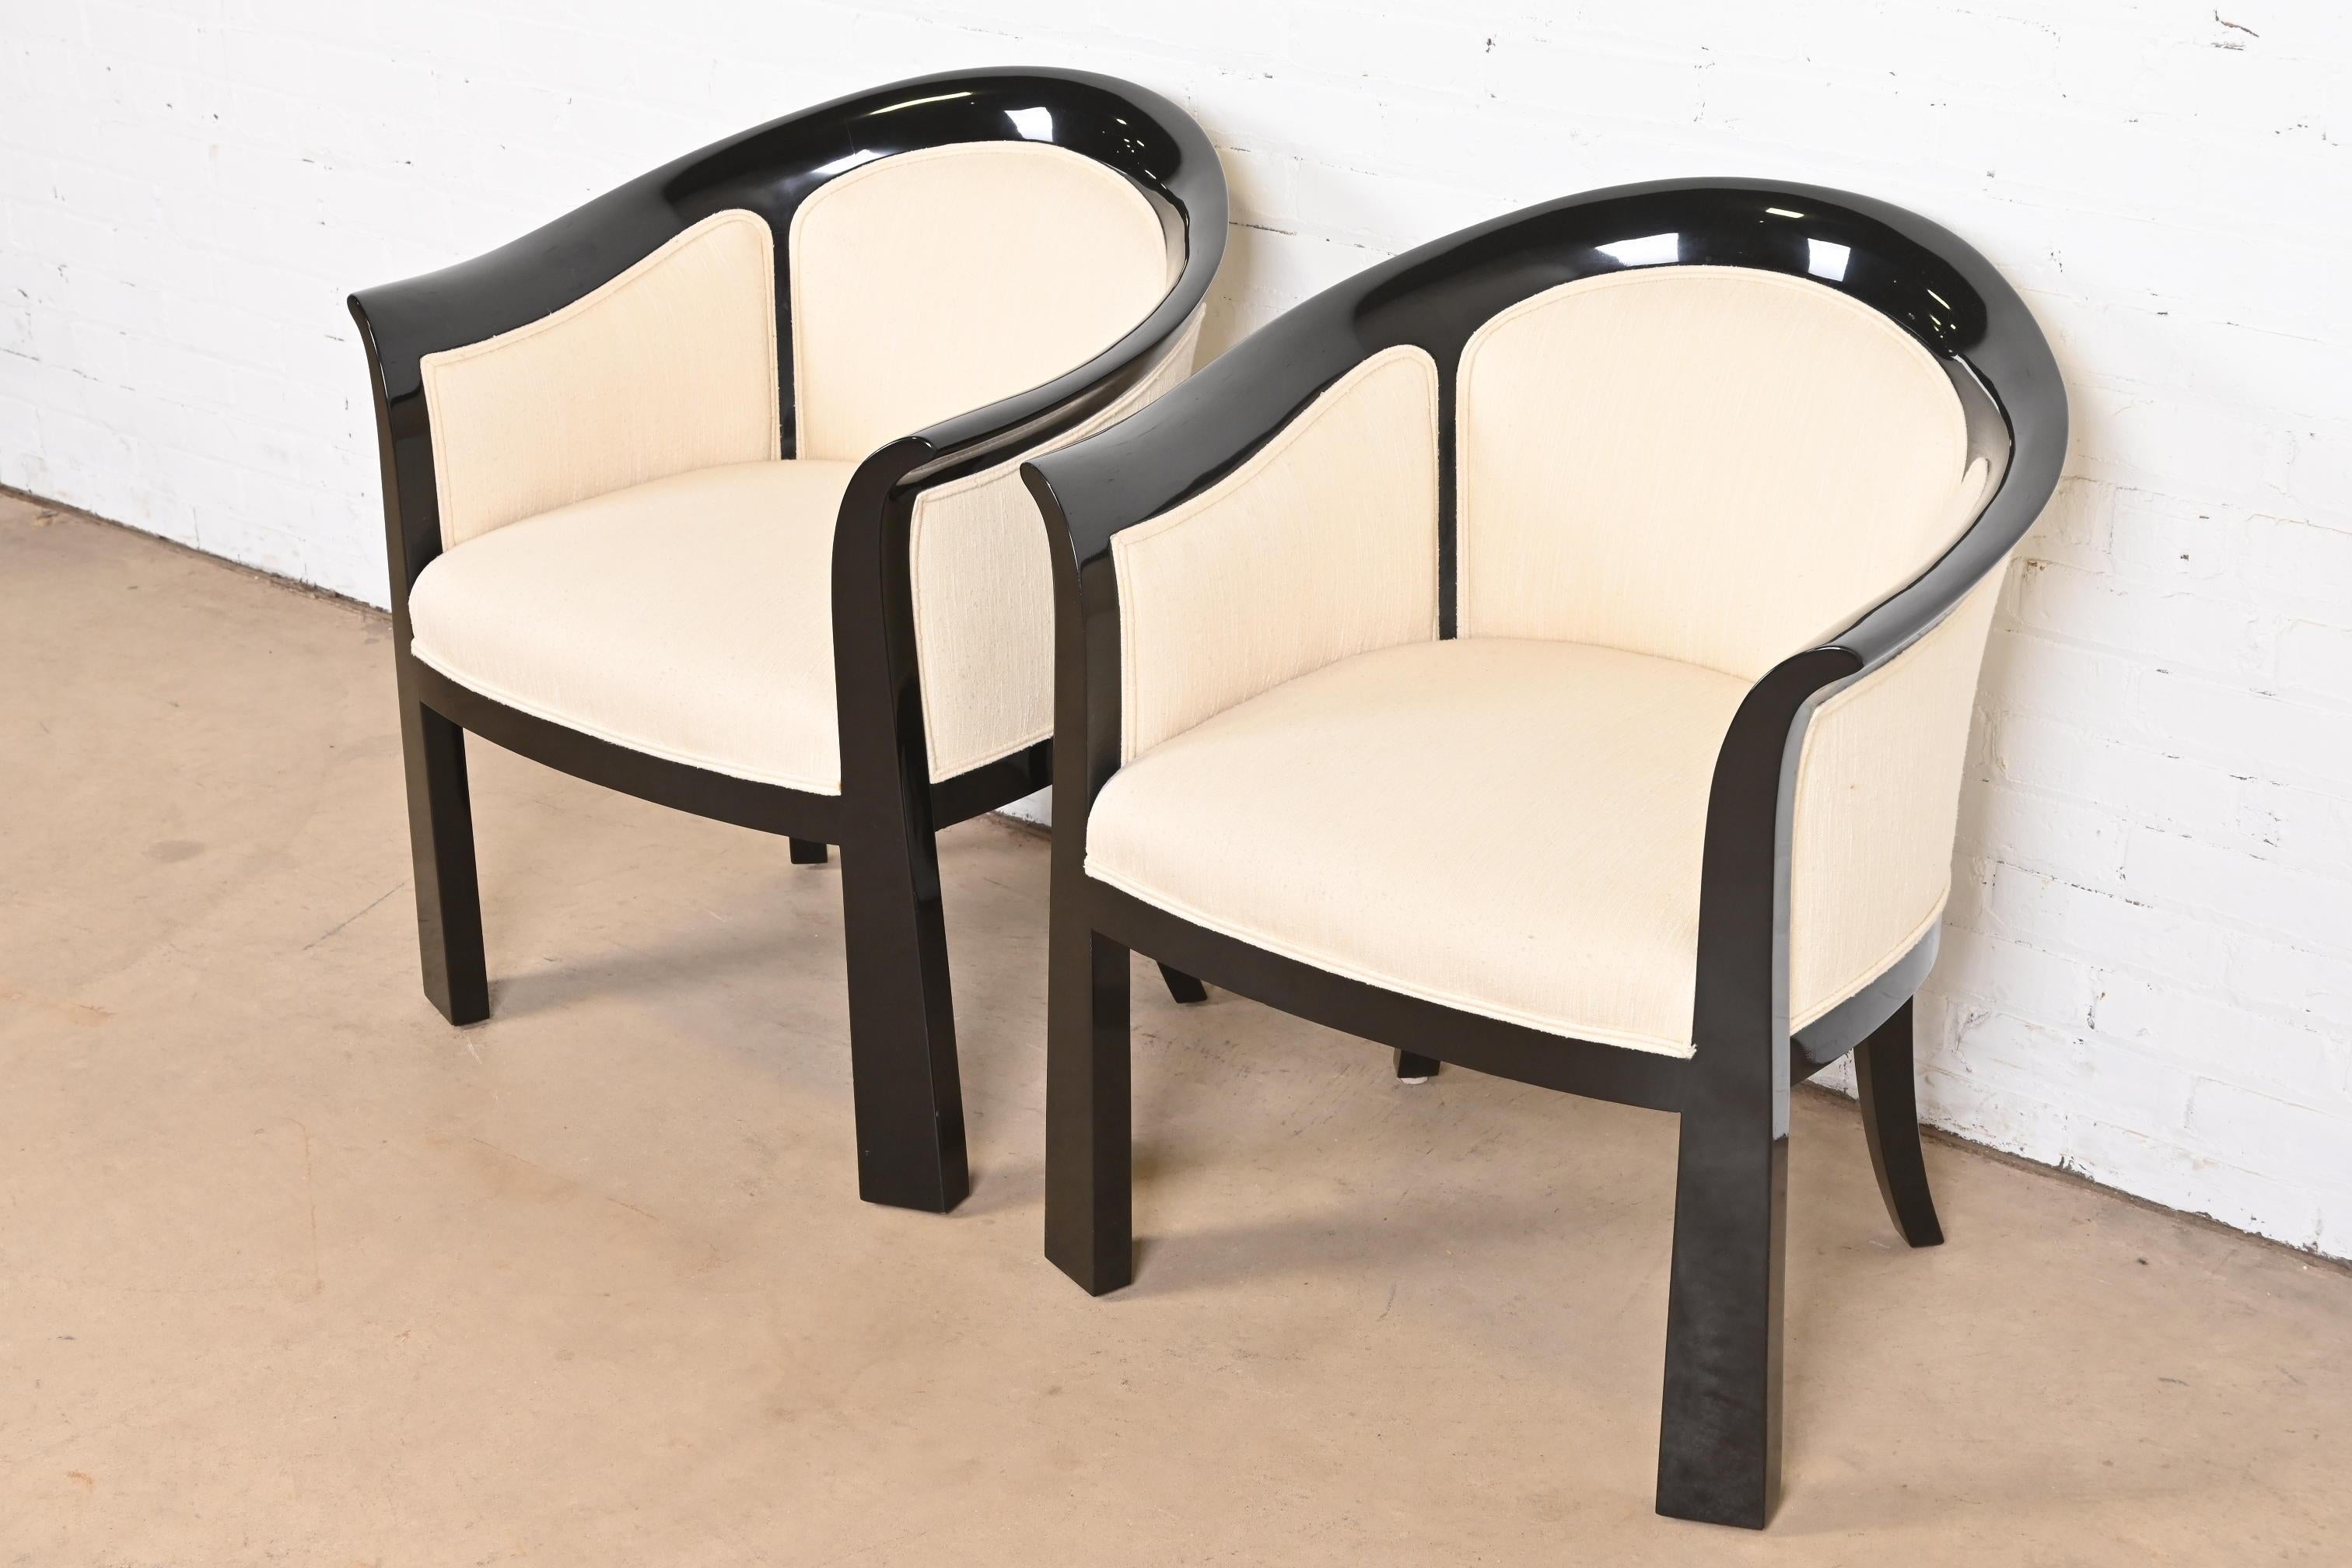 Upholstery Interior Crafts Modern Art Deco Black Lacquered Tub Chairs, Pair